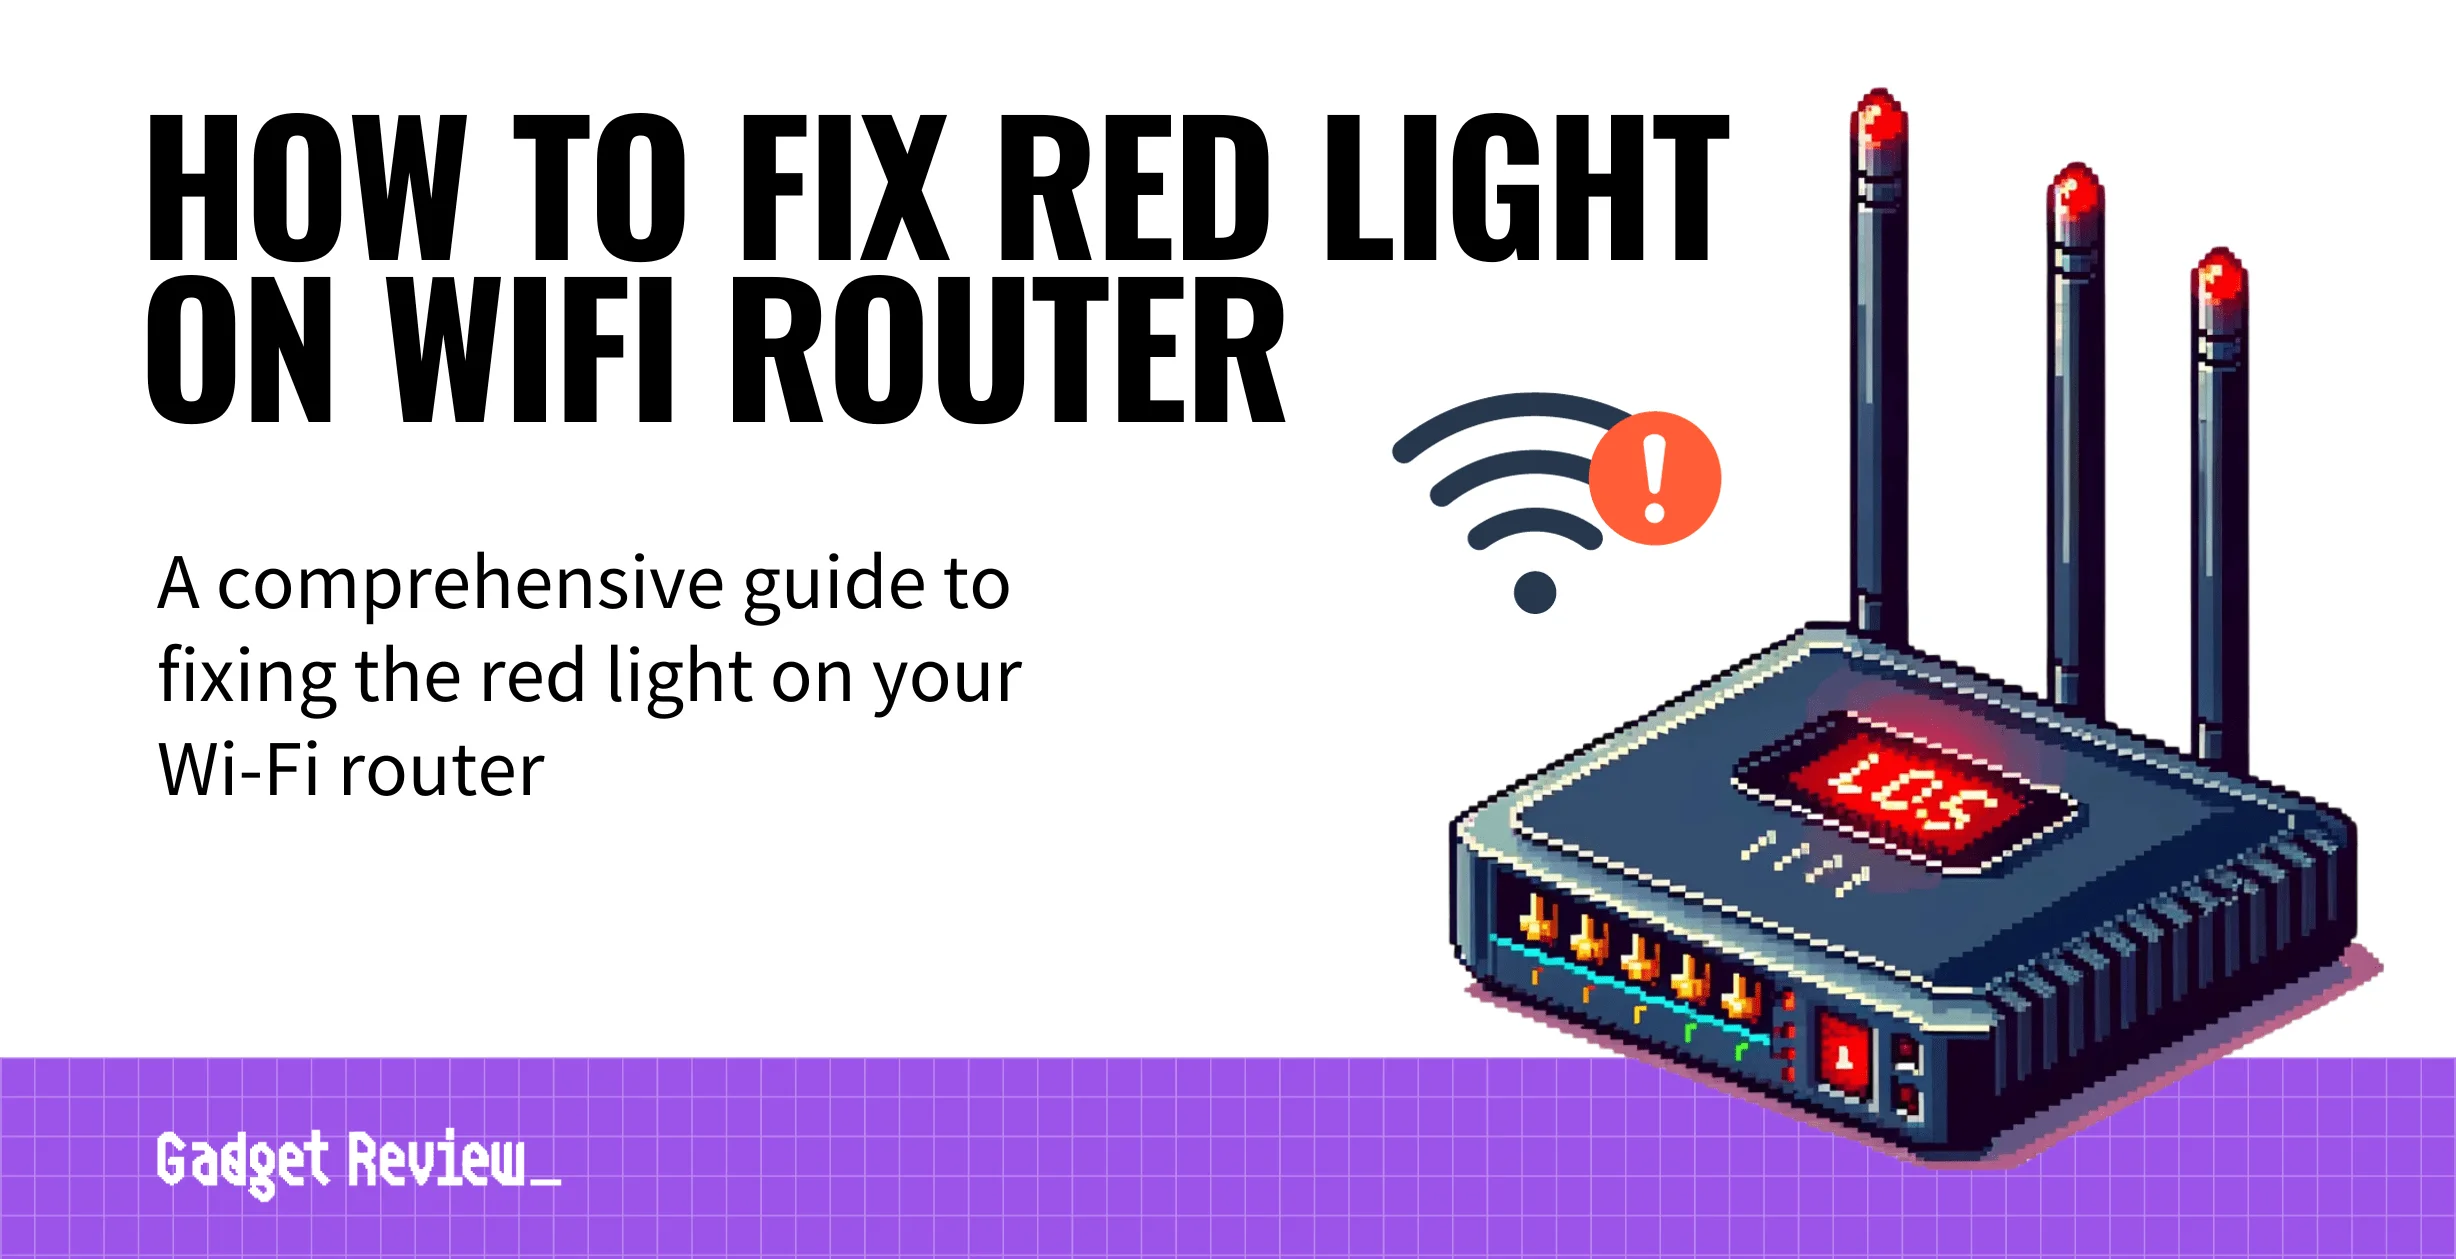 How to Fix Red Light on a Wi-Fi Router